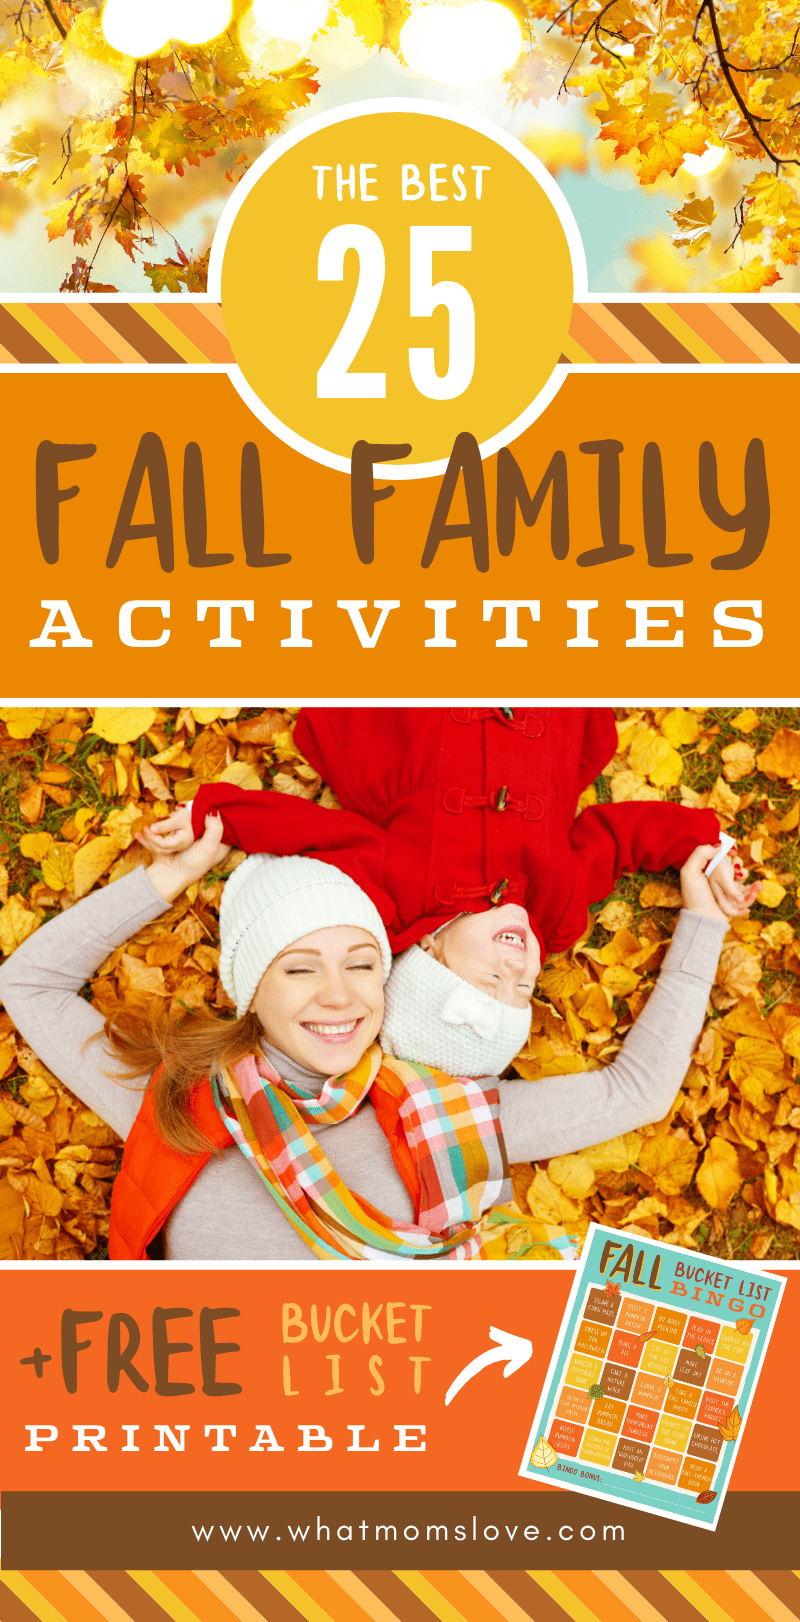 The best Fall Bucket List for families | Fun activities for your kids to do this Fall + free printable Fall Bucket List bingo game